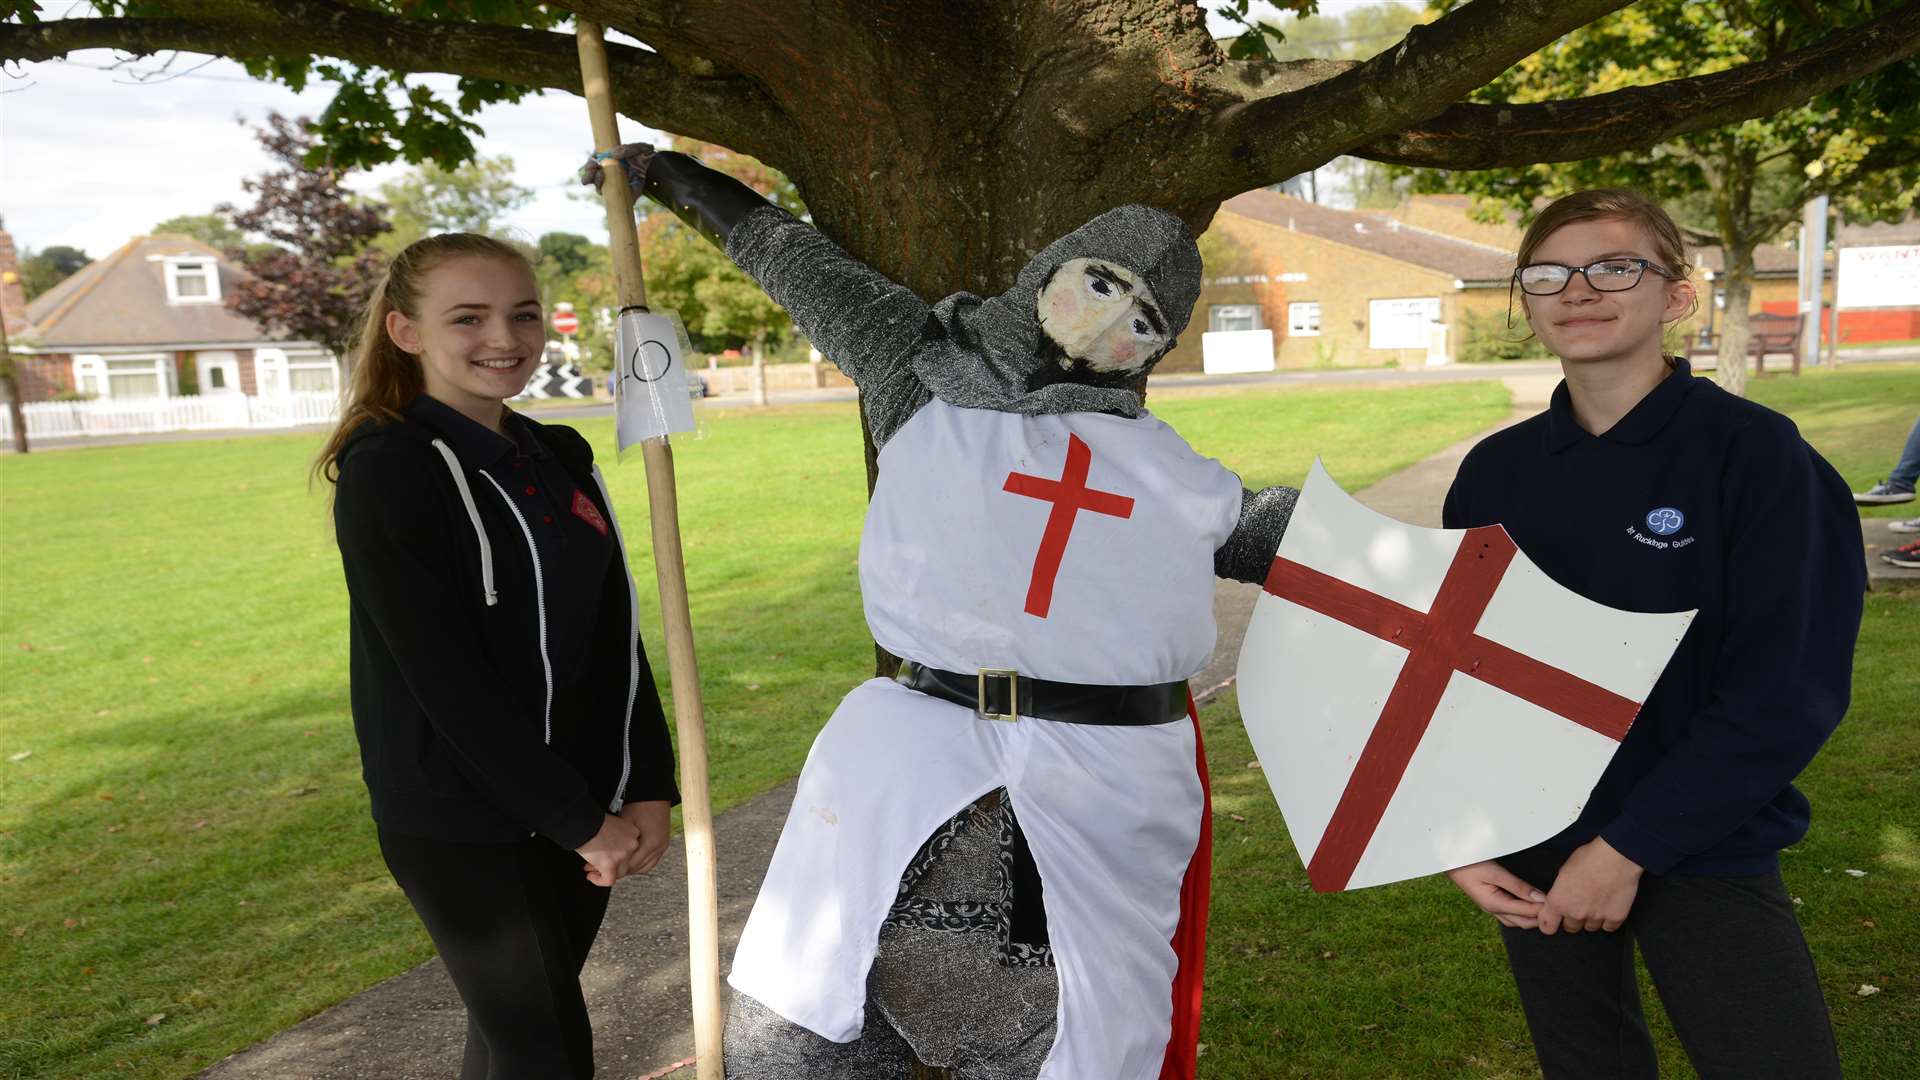 Kerry Cook and Megan Whorlew from the 1st Ruckinge and Hamstreet Guides with Saint George.